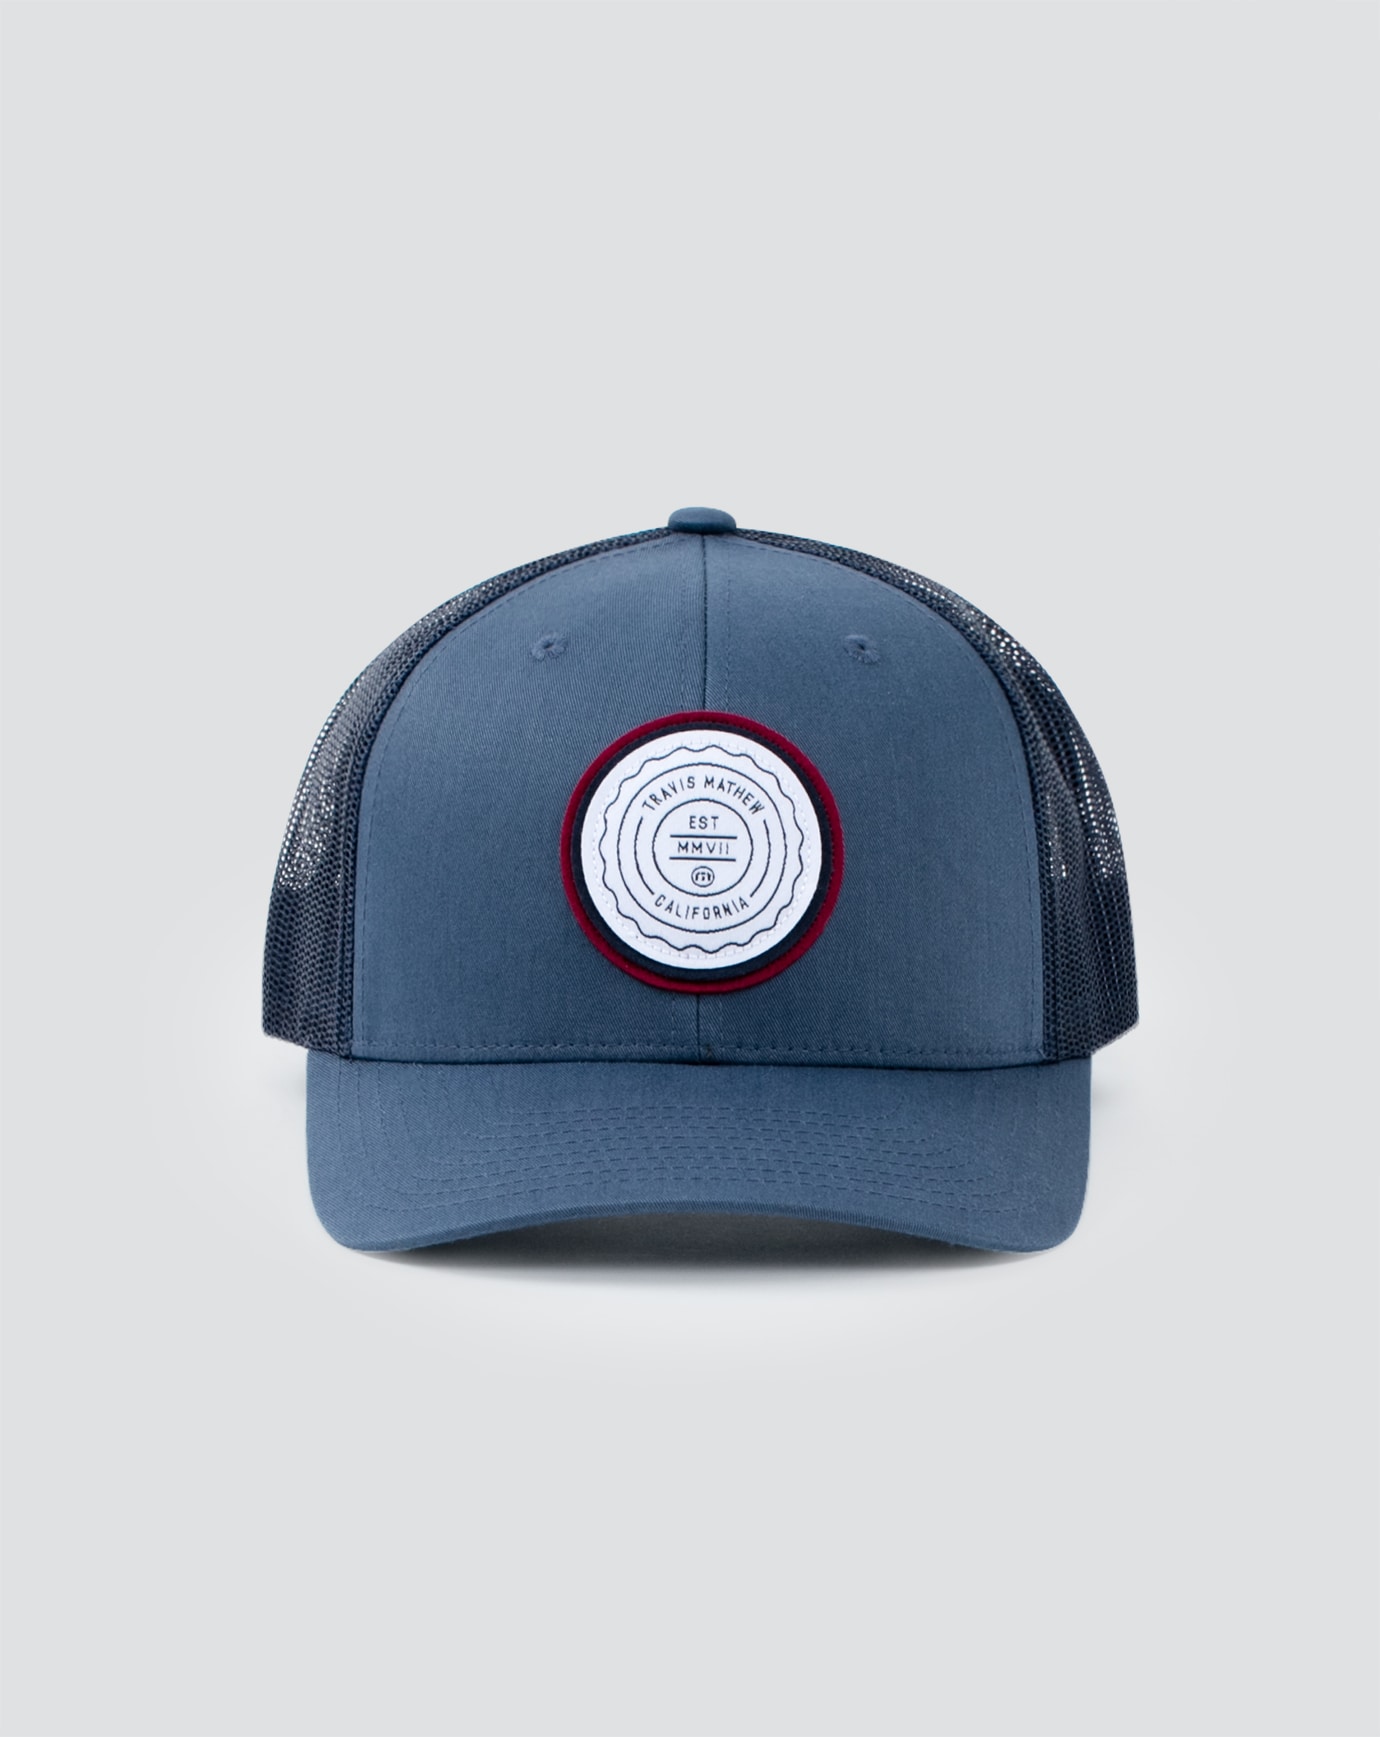 THE PATCH YOUTH HAT